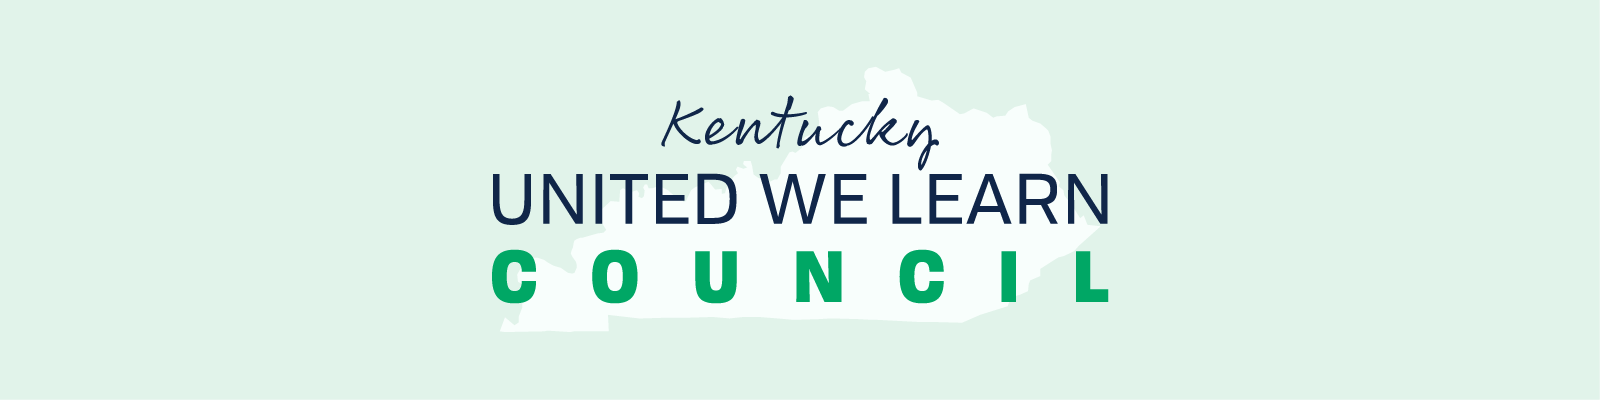 Kentucky United We Learn Council Google Form Header.png